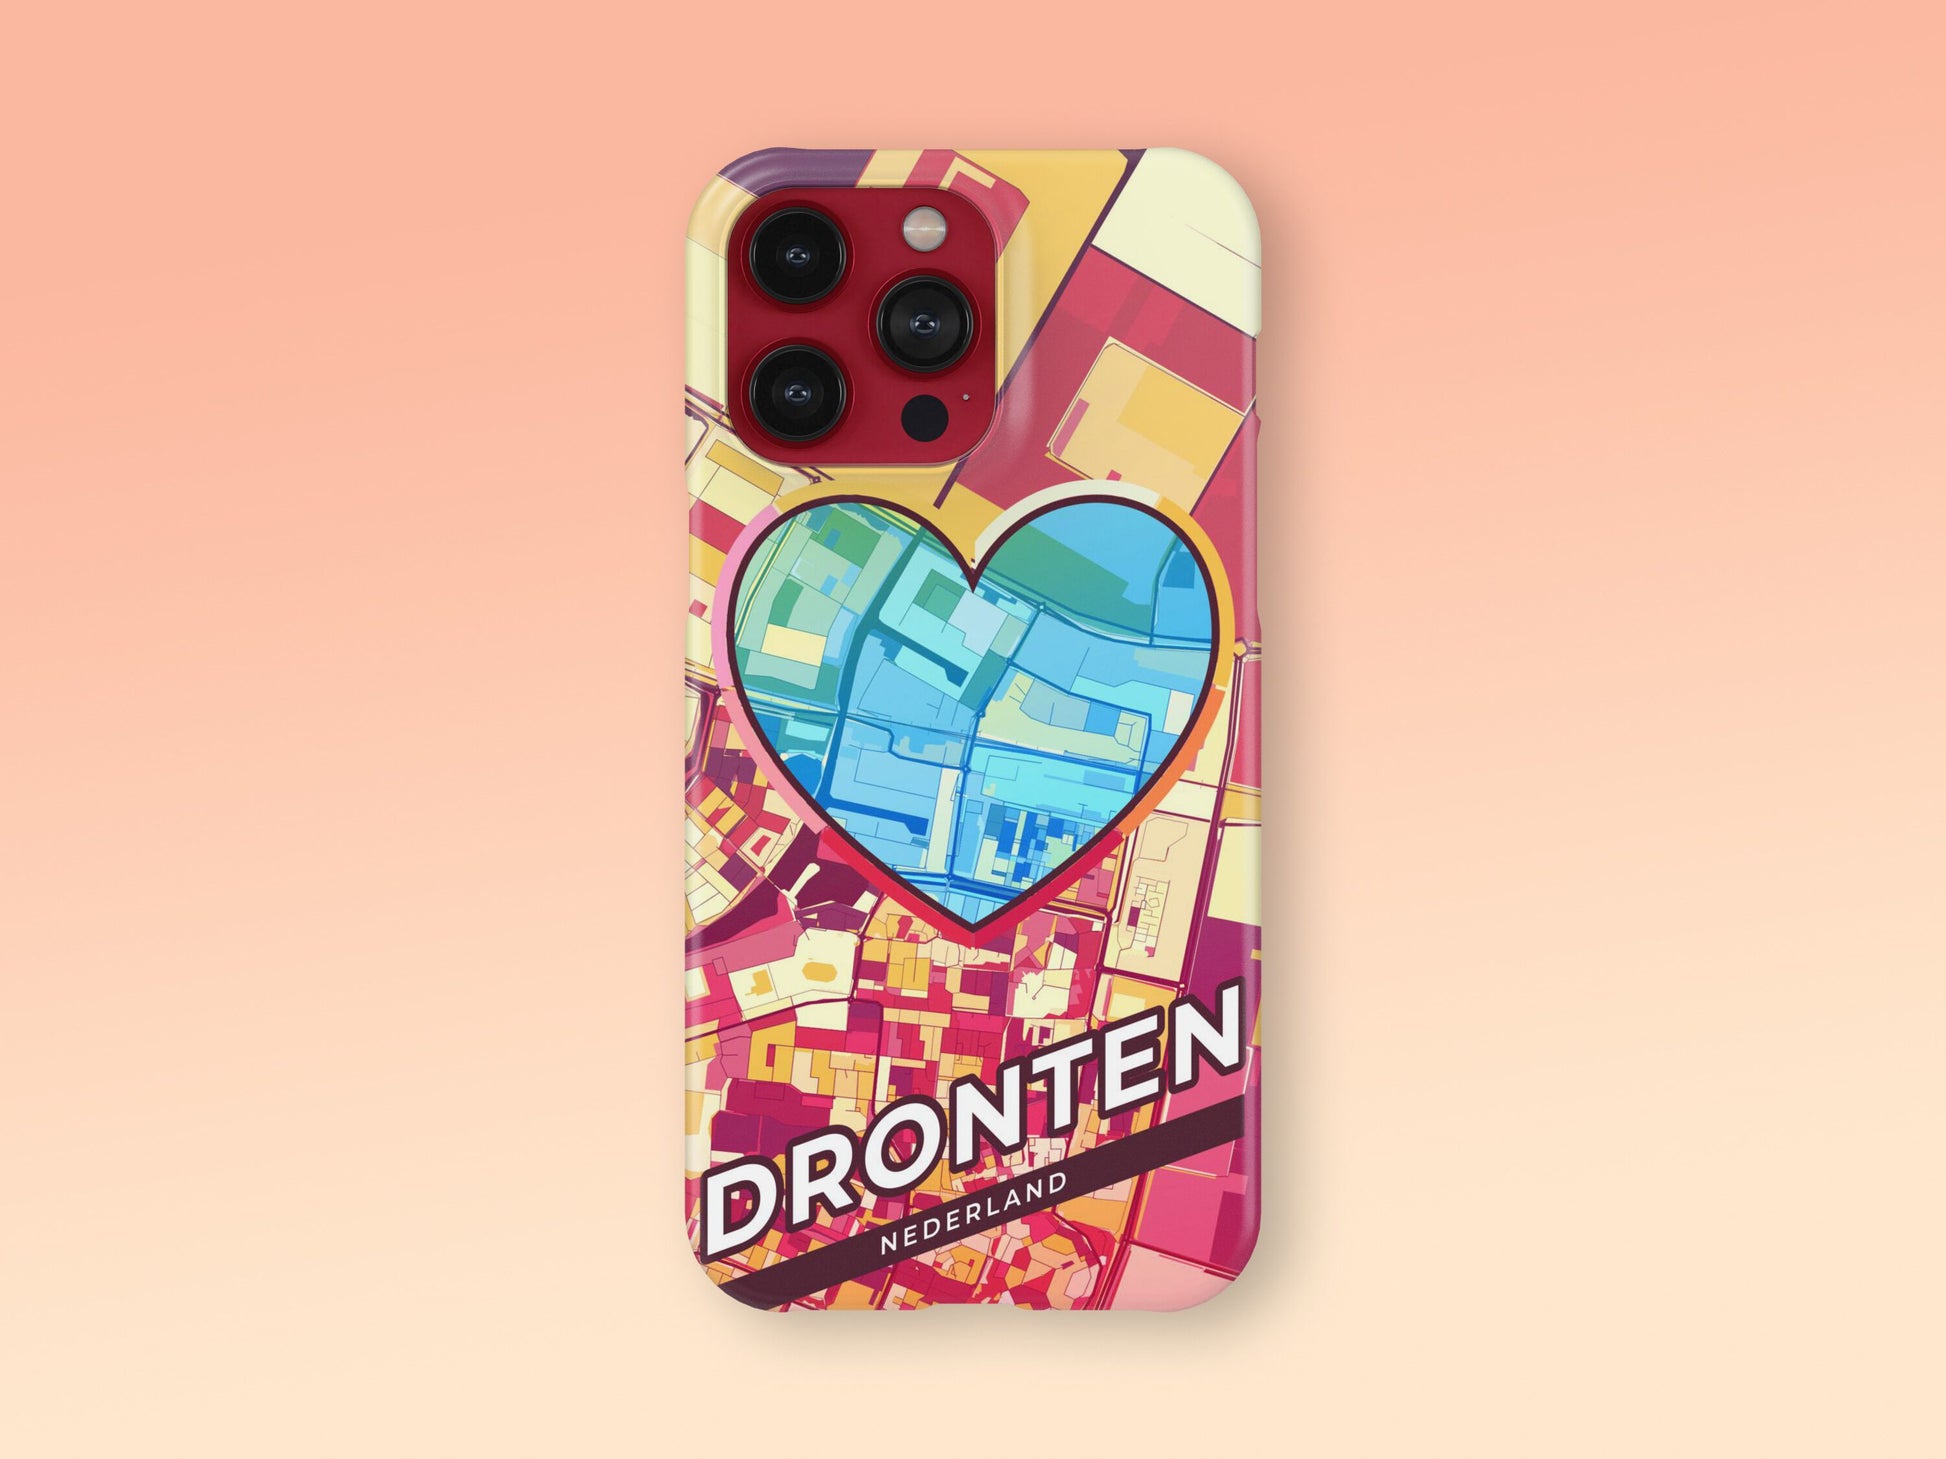 Dronten Netherlands slim phone case with colorful icon. Birthday, wedding or housewarming gift. Couple match cases. 2